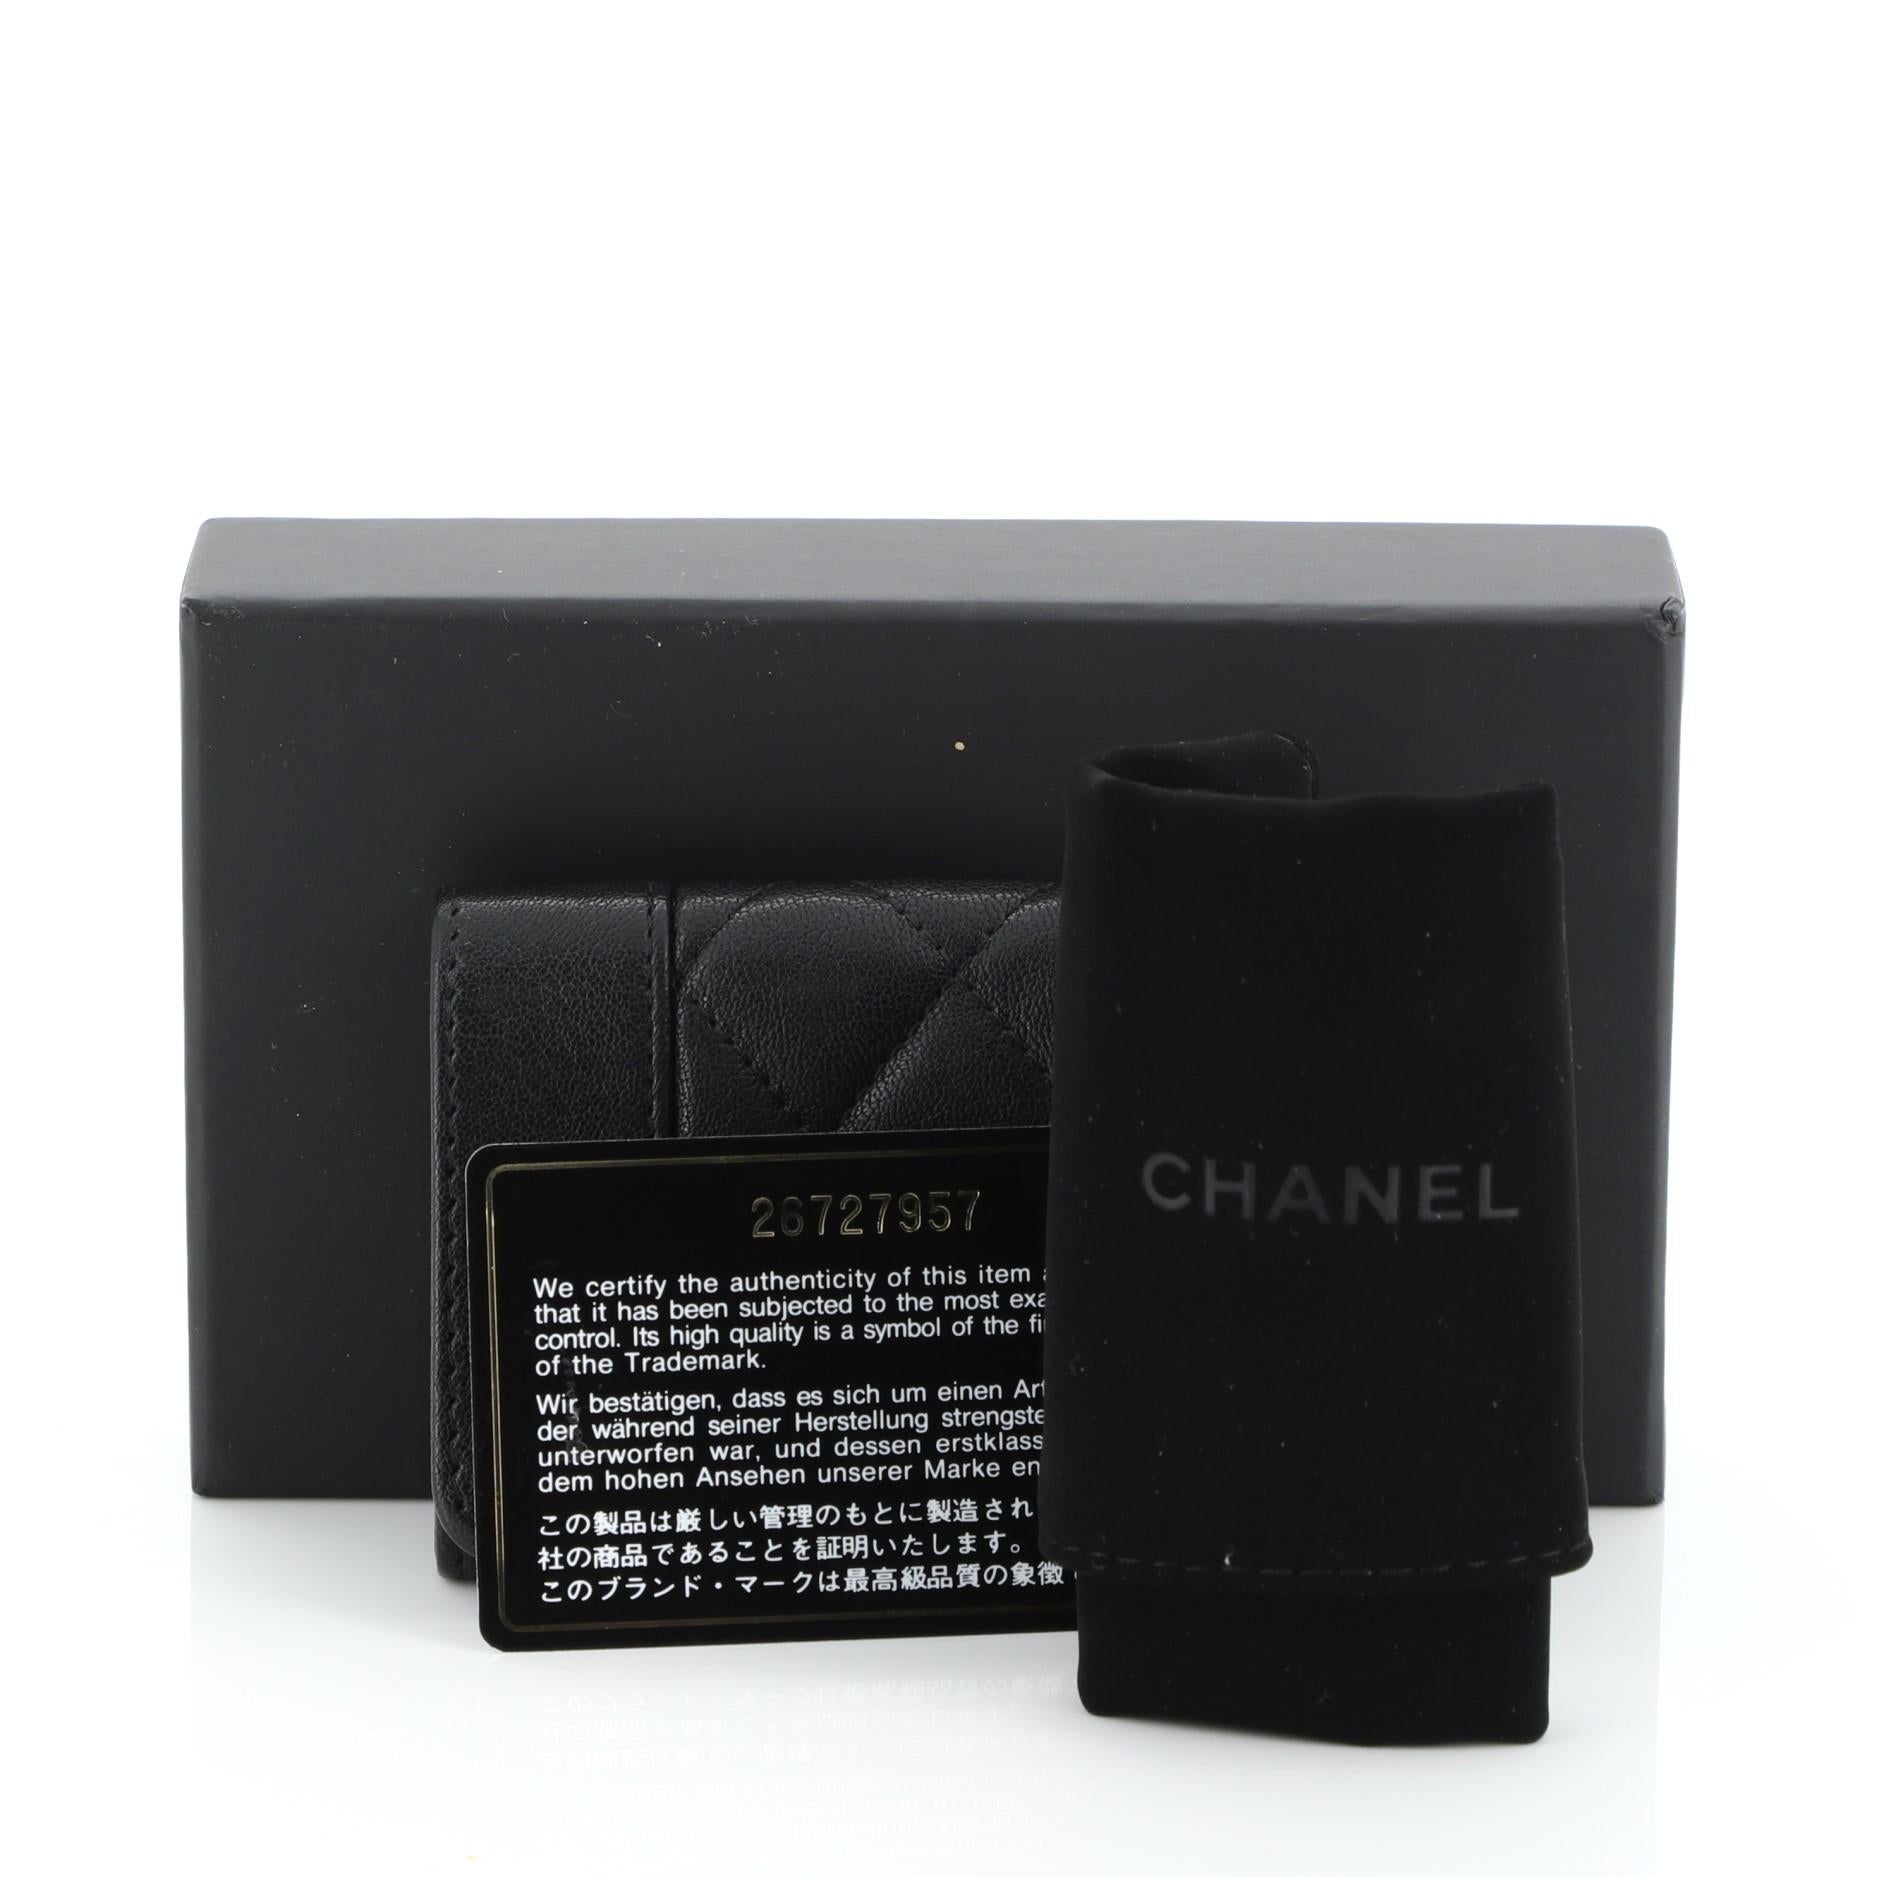 This Chanel Mademoiselle Vintage Flap Card Holder Quilted Sheepskin, crafted in black leather, features enamel Chanel CC log and gold and black-tone hardware. Its snap closure opens to a black fabric interior. Hologram sticker reads: 26727957.